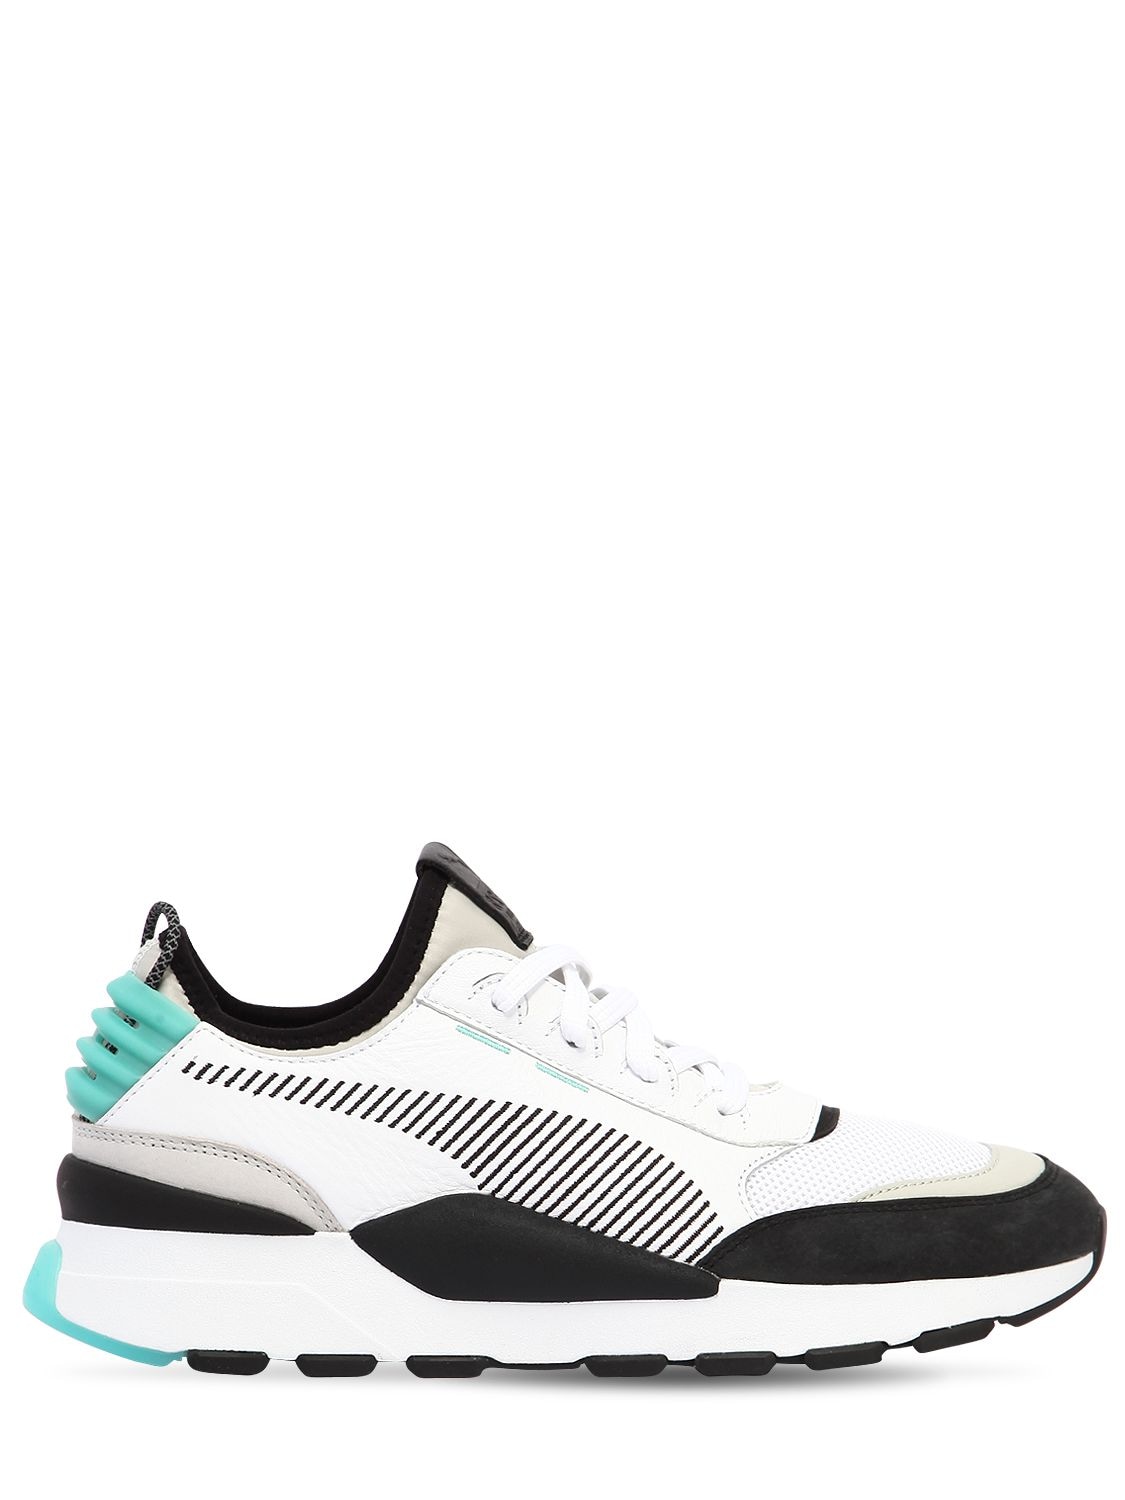 PUMA RS-0 RE-INVENTION SNEAKERS,67IW3E002-MDE1